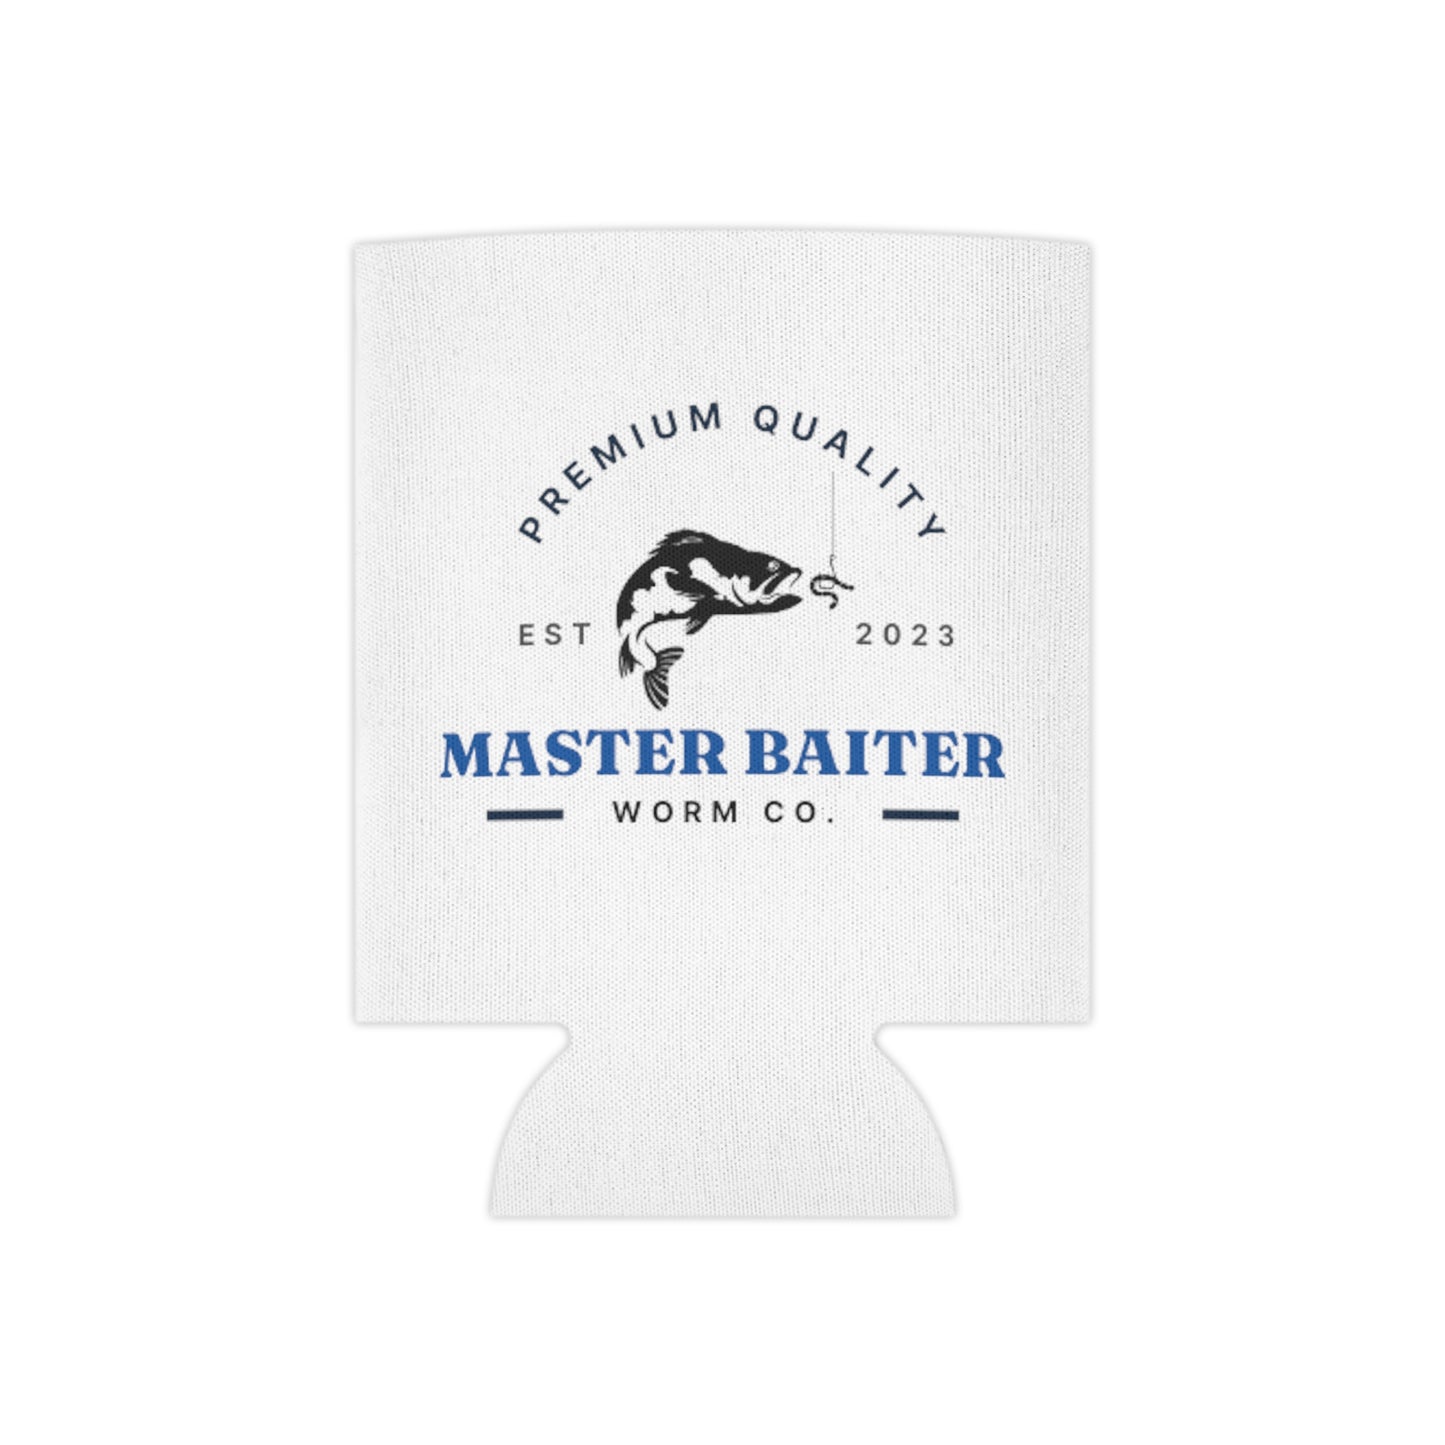 Master Baiter Worm Co. "Because every good angler needs a hand" Can Cooler